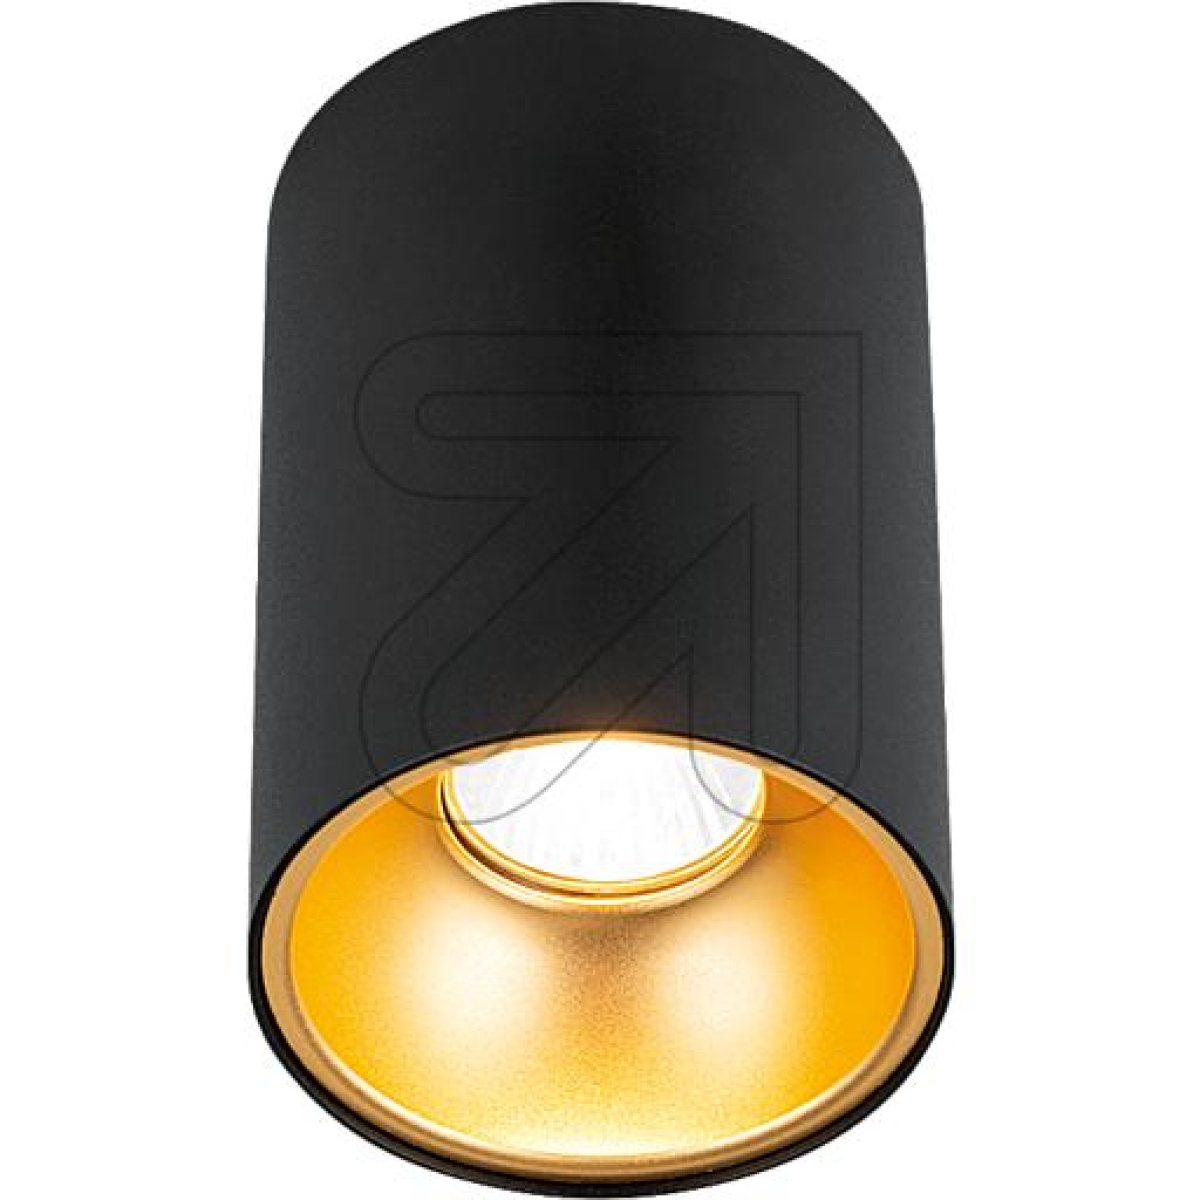 ORION LichtHV surface-mounted luminaire 1xGU10/50W DL 7-681 blackArticle-No: 625775